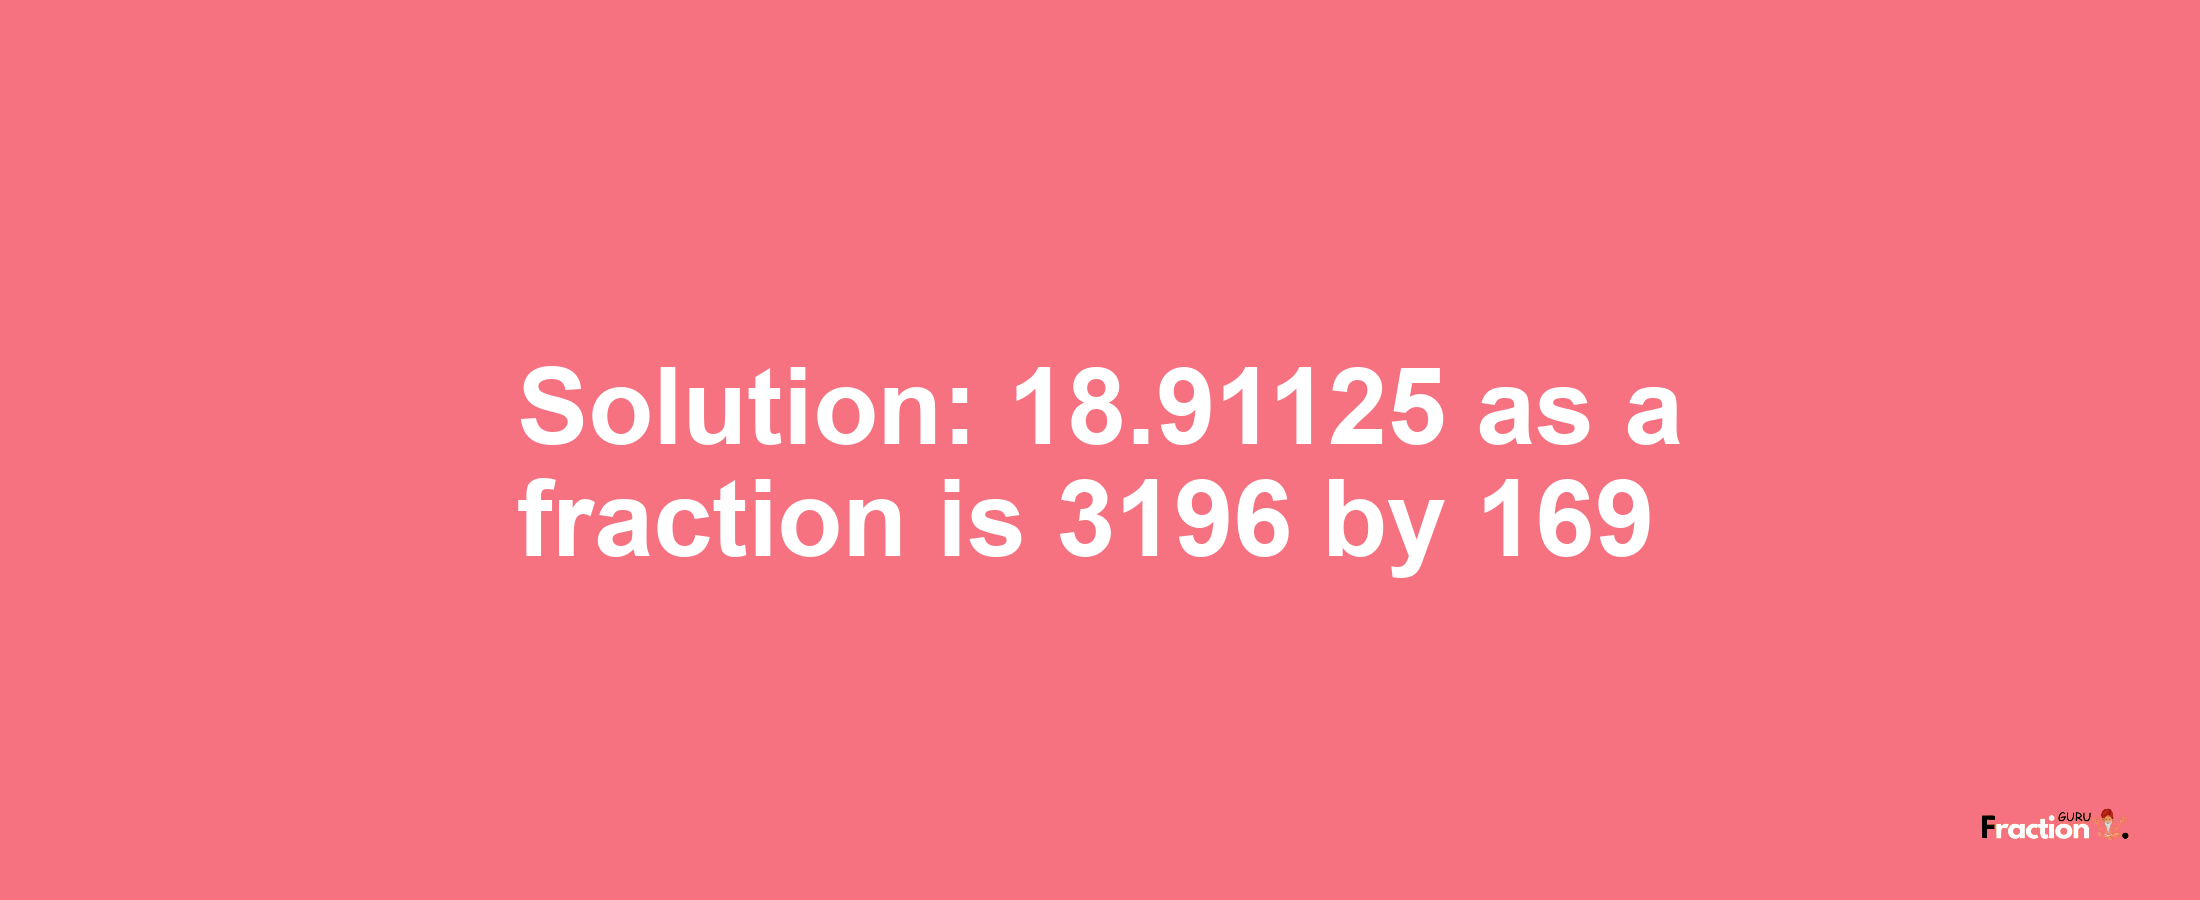 Solution:18.91125 as a fraction is 3196/169